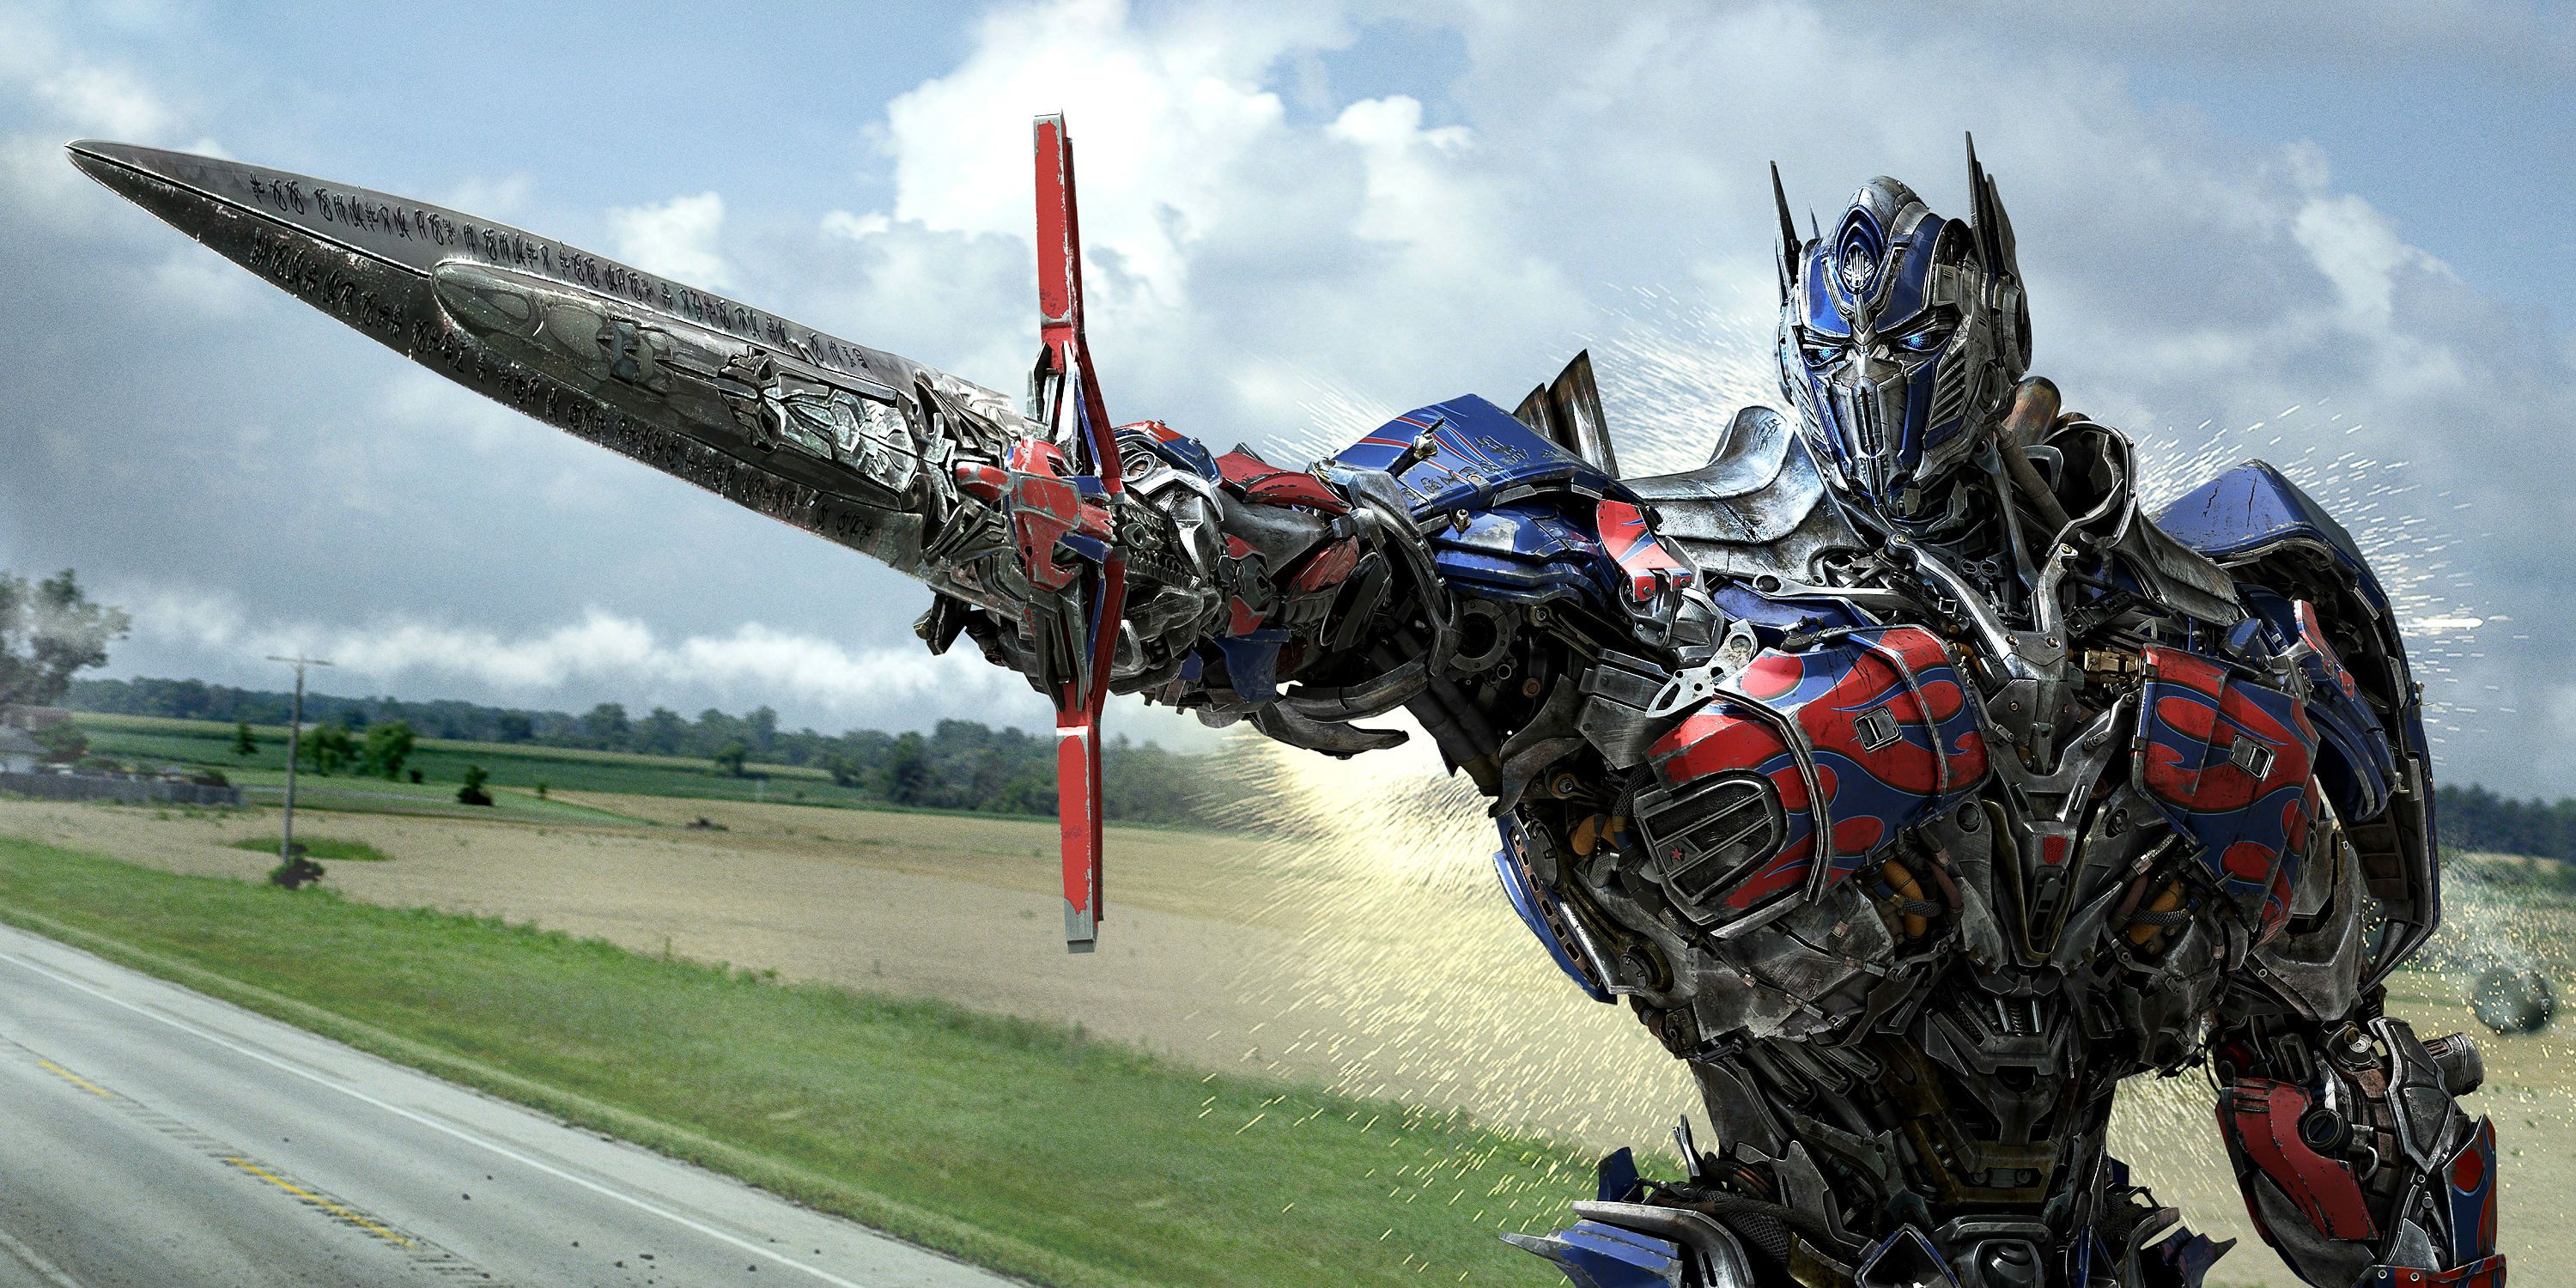 WATCH: ‘Transformers: The Last Knight’ IMAX Featurette